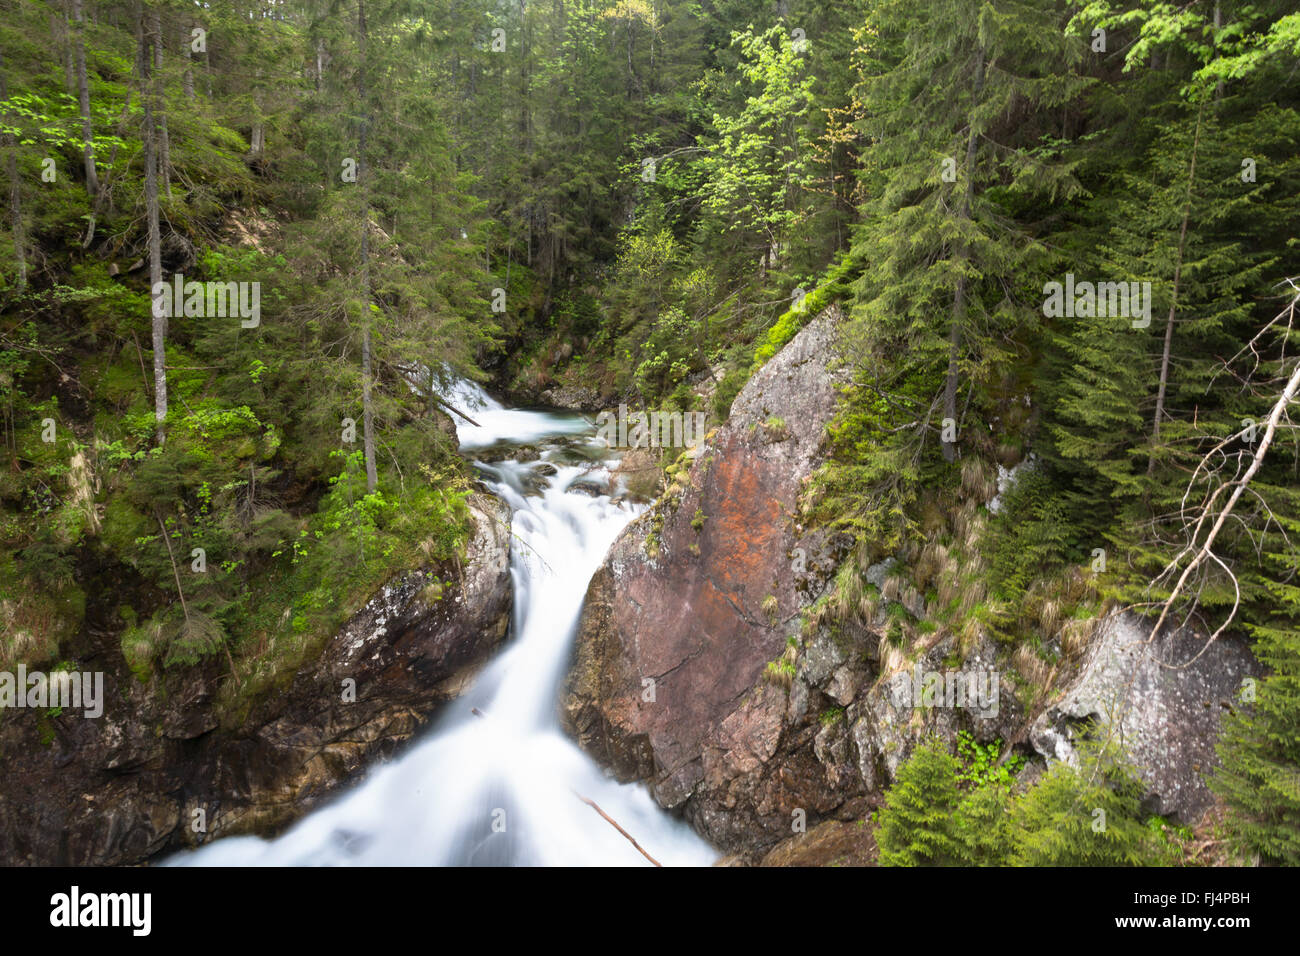 Long exposure of water flowing down a stream in a forest among rocks inside Tatra National Park - Lesser, Poland Stock Photo